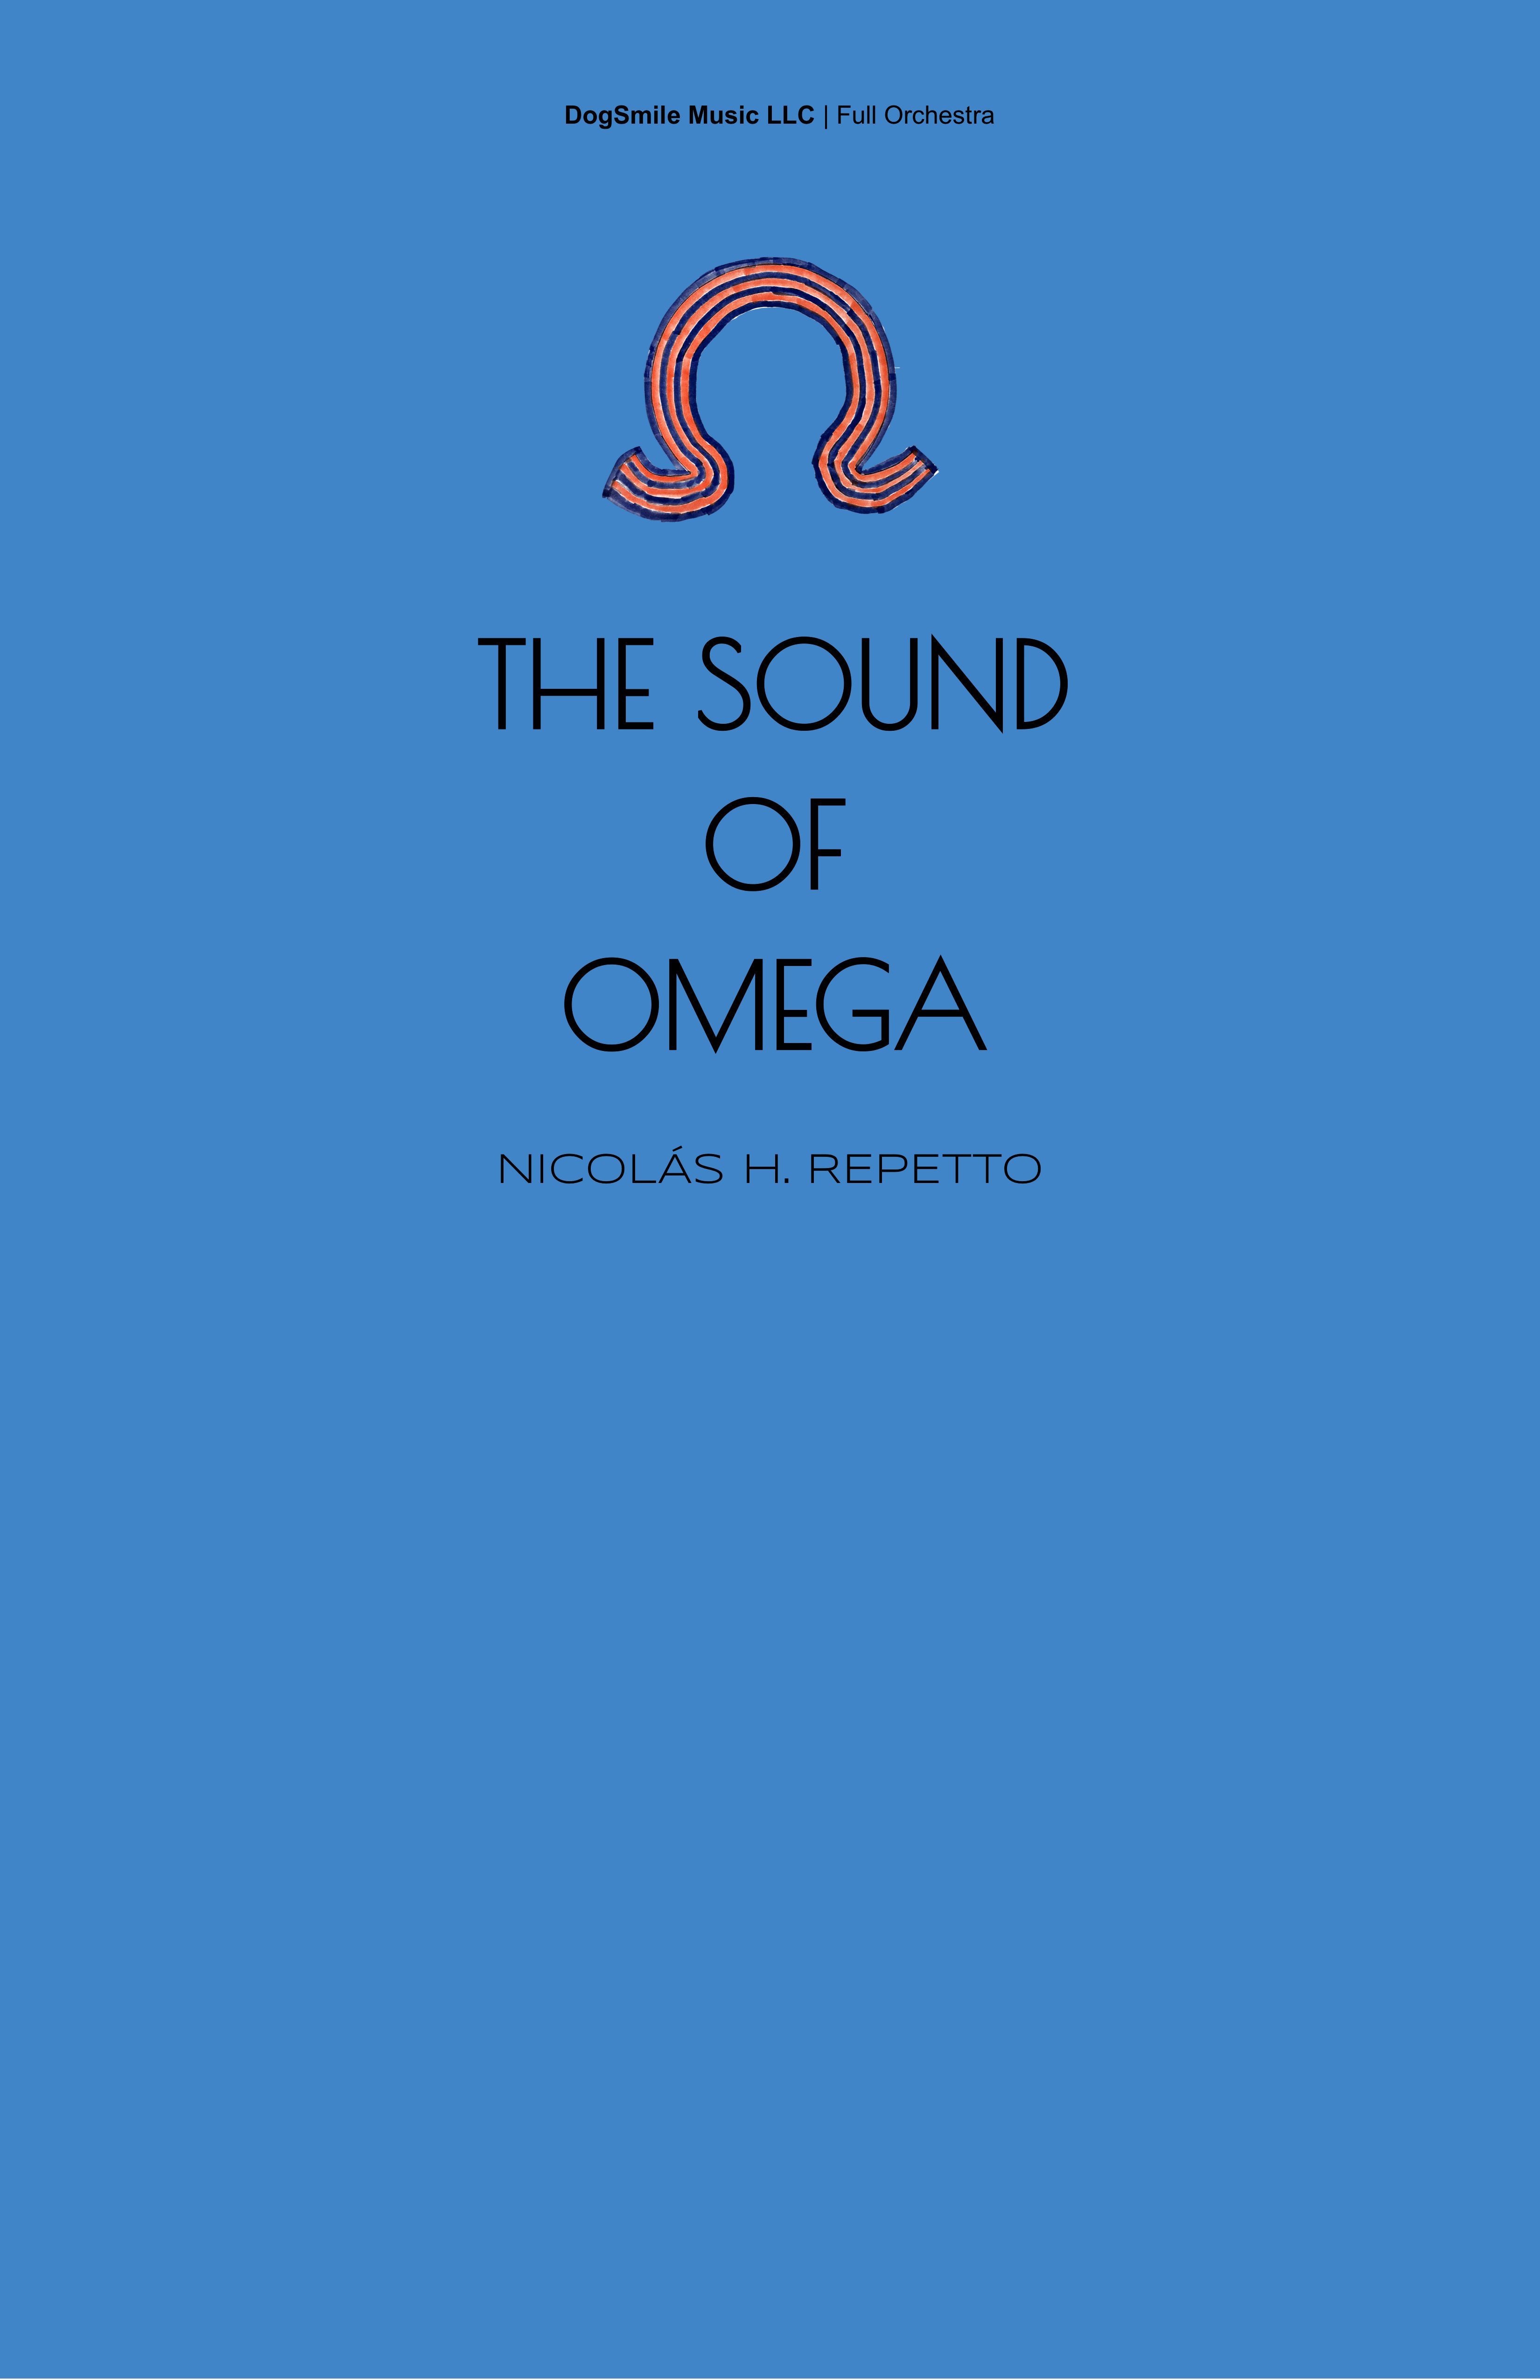 The Sound of Omega